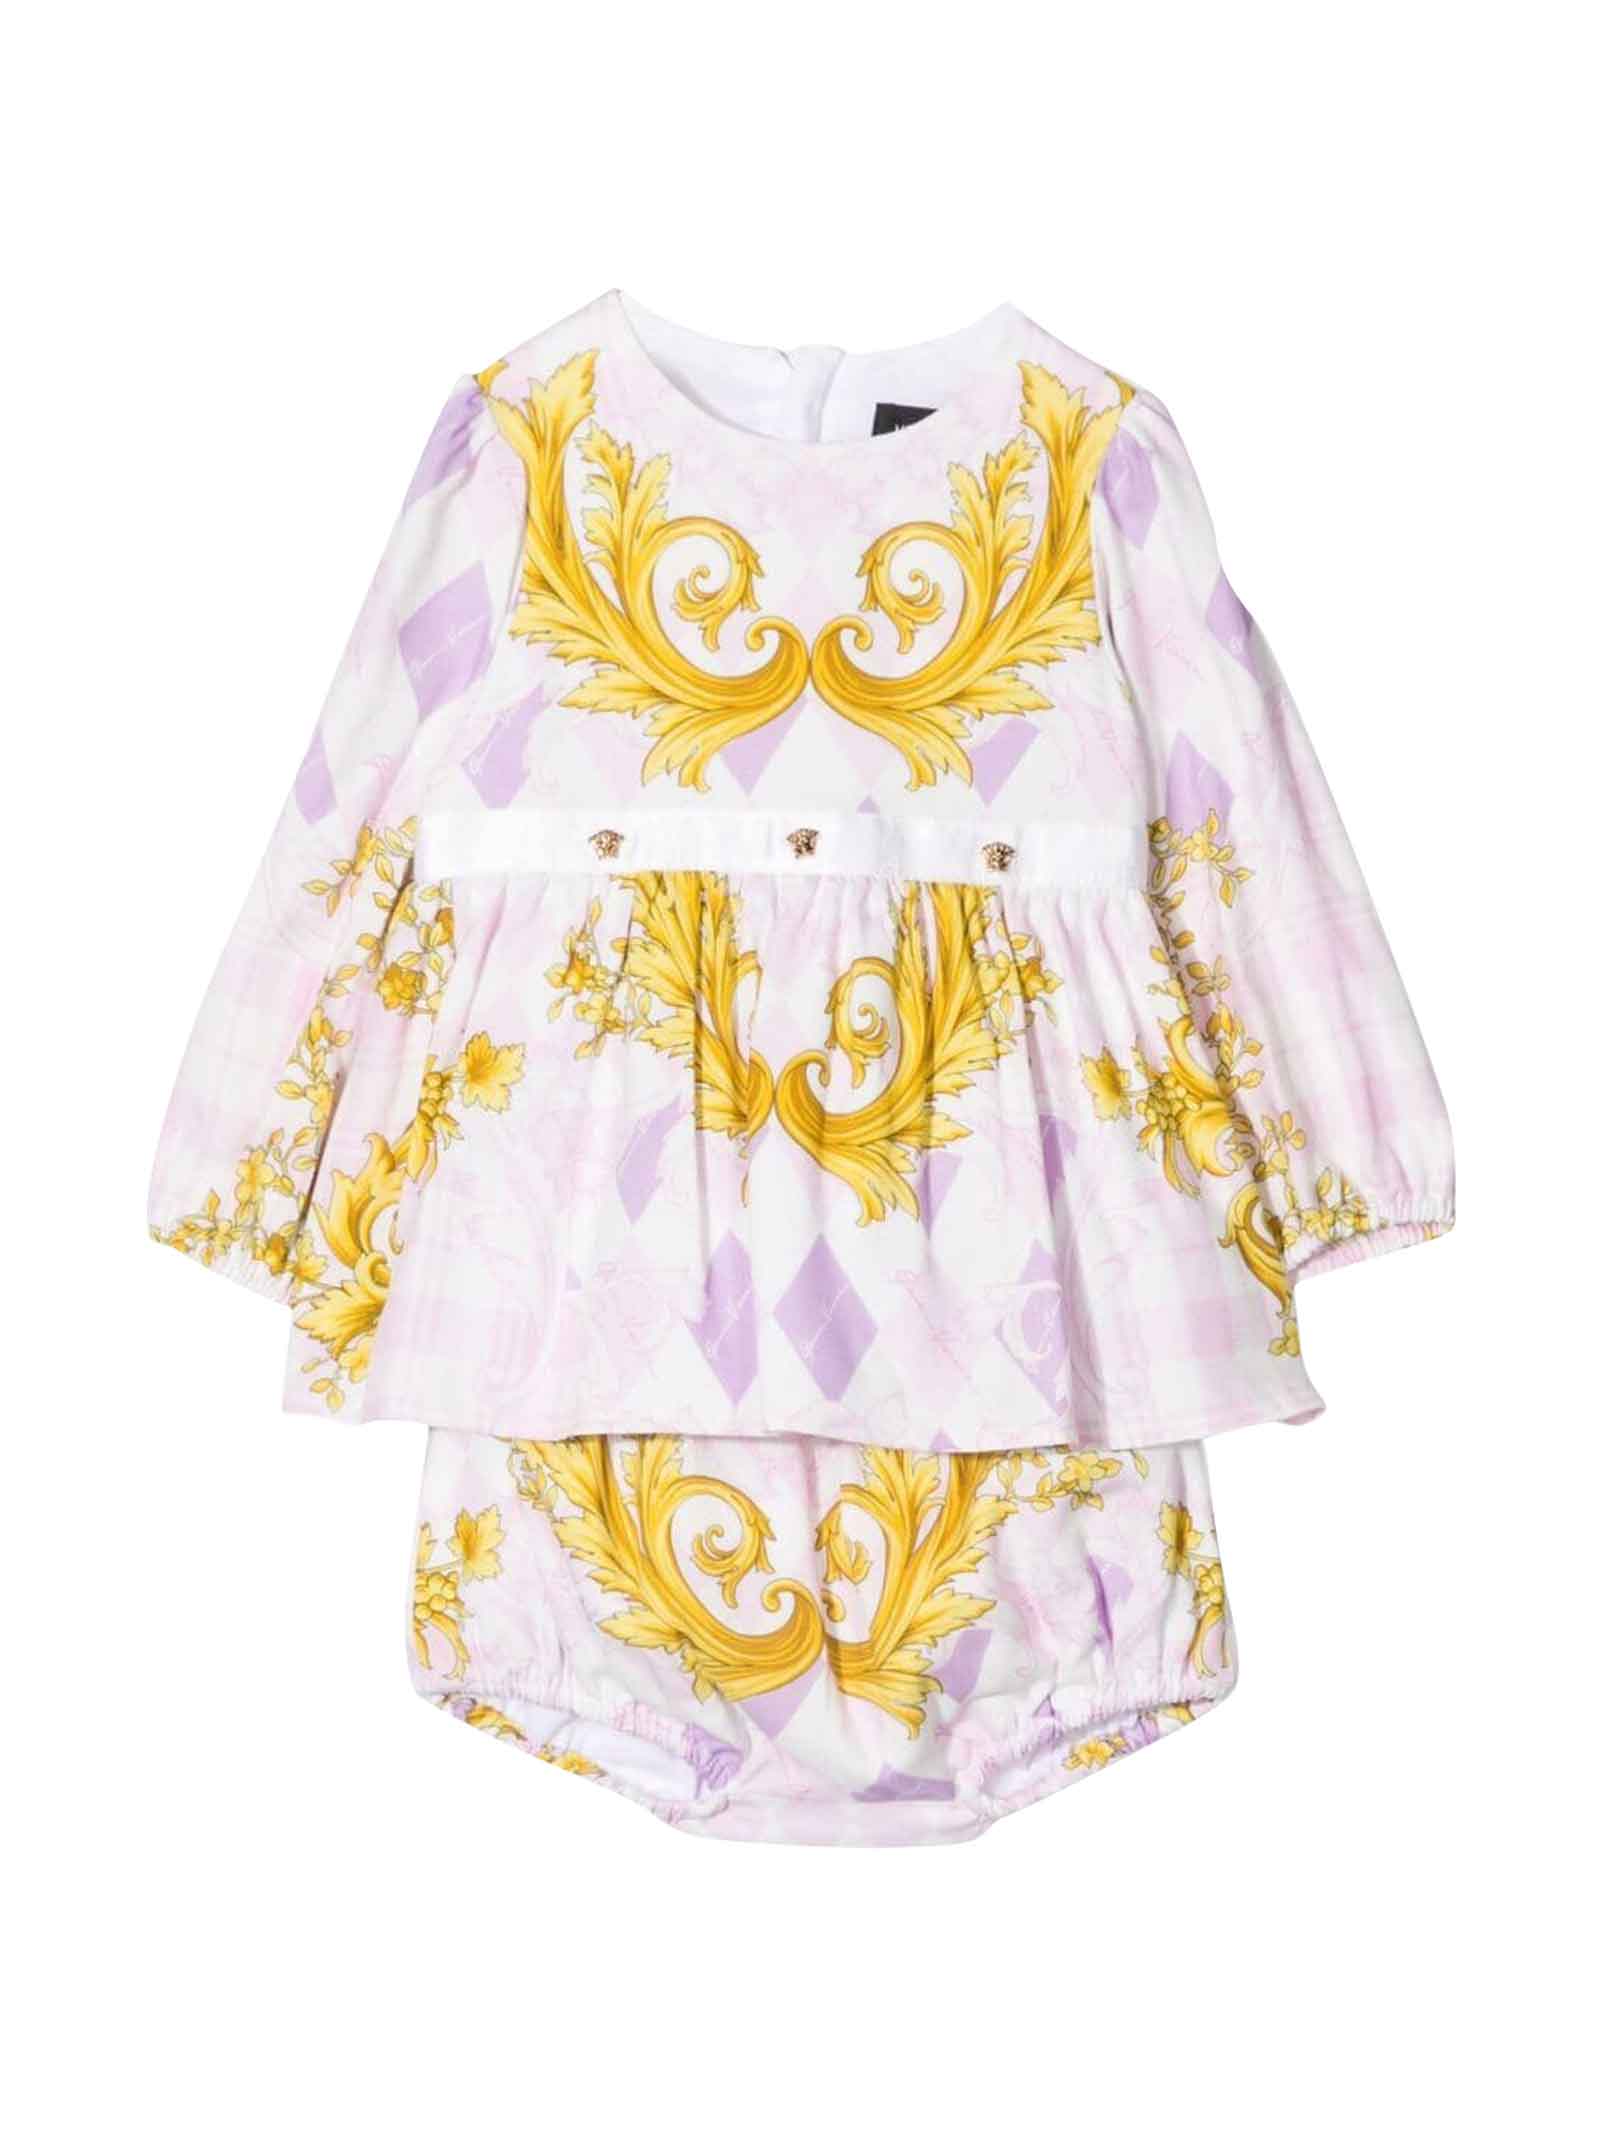 Versace Young Newborn Patterned Outfit